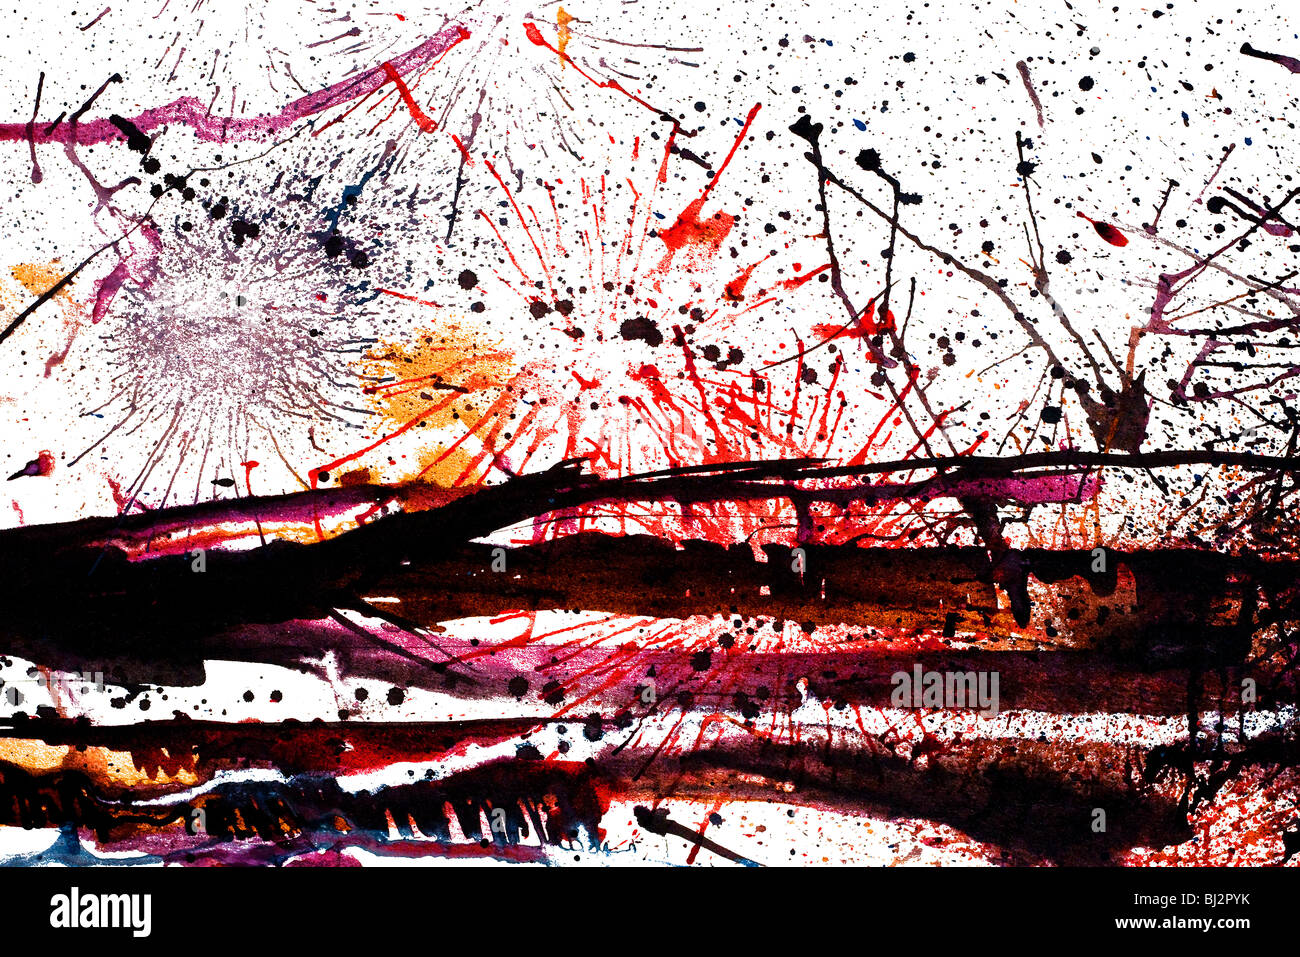 Abstract ink painting. Stock Photo